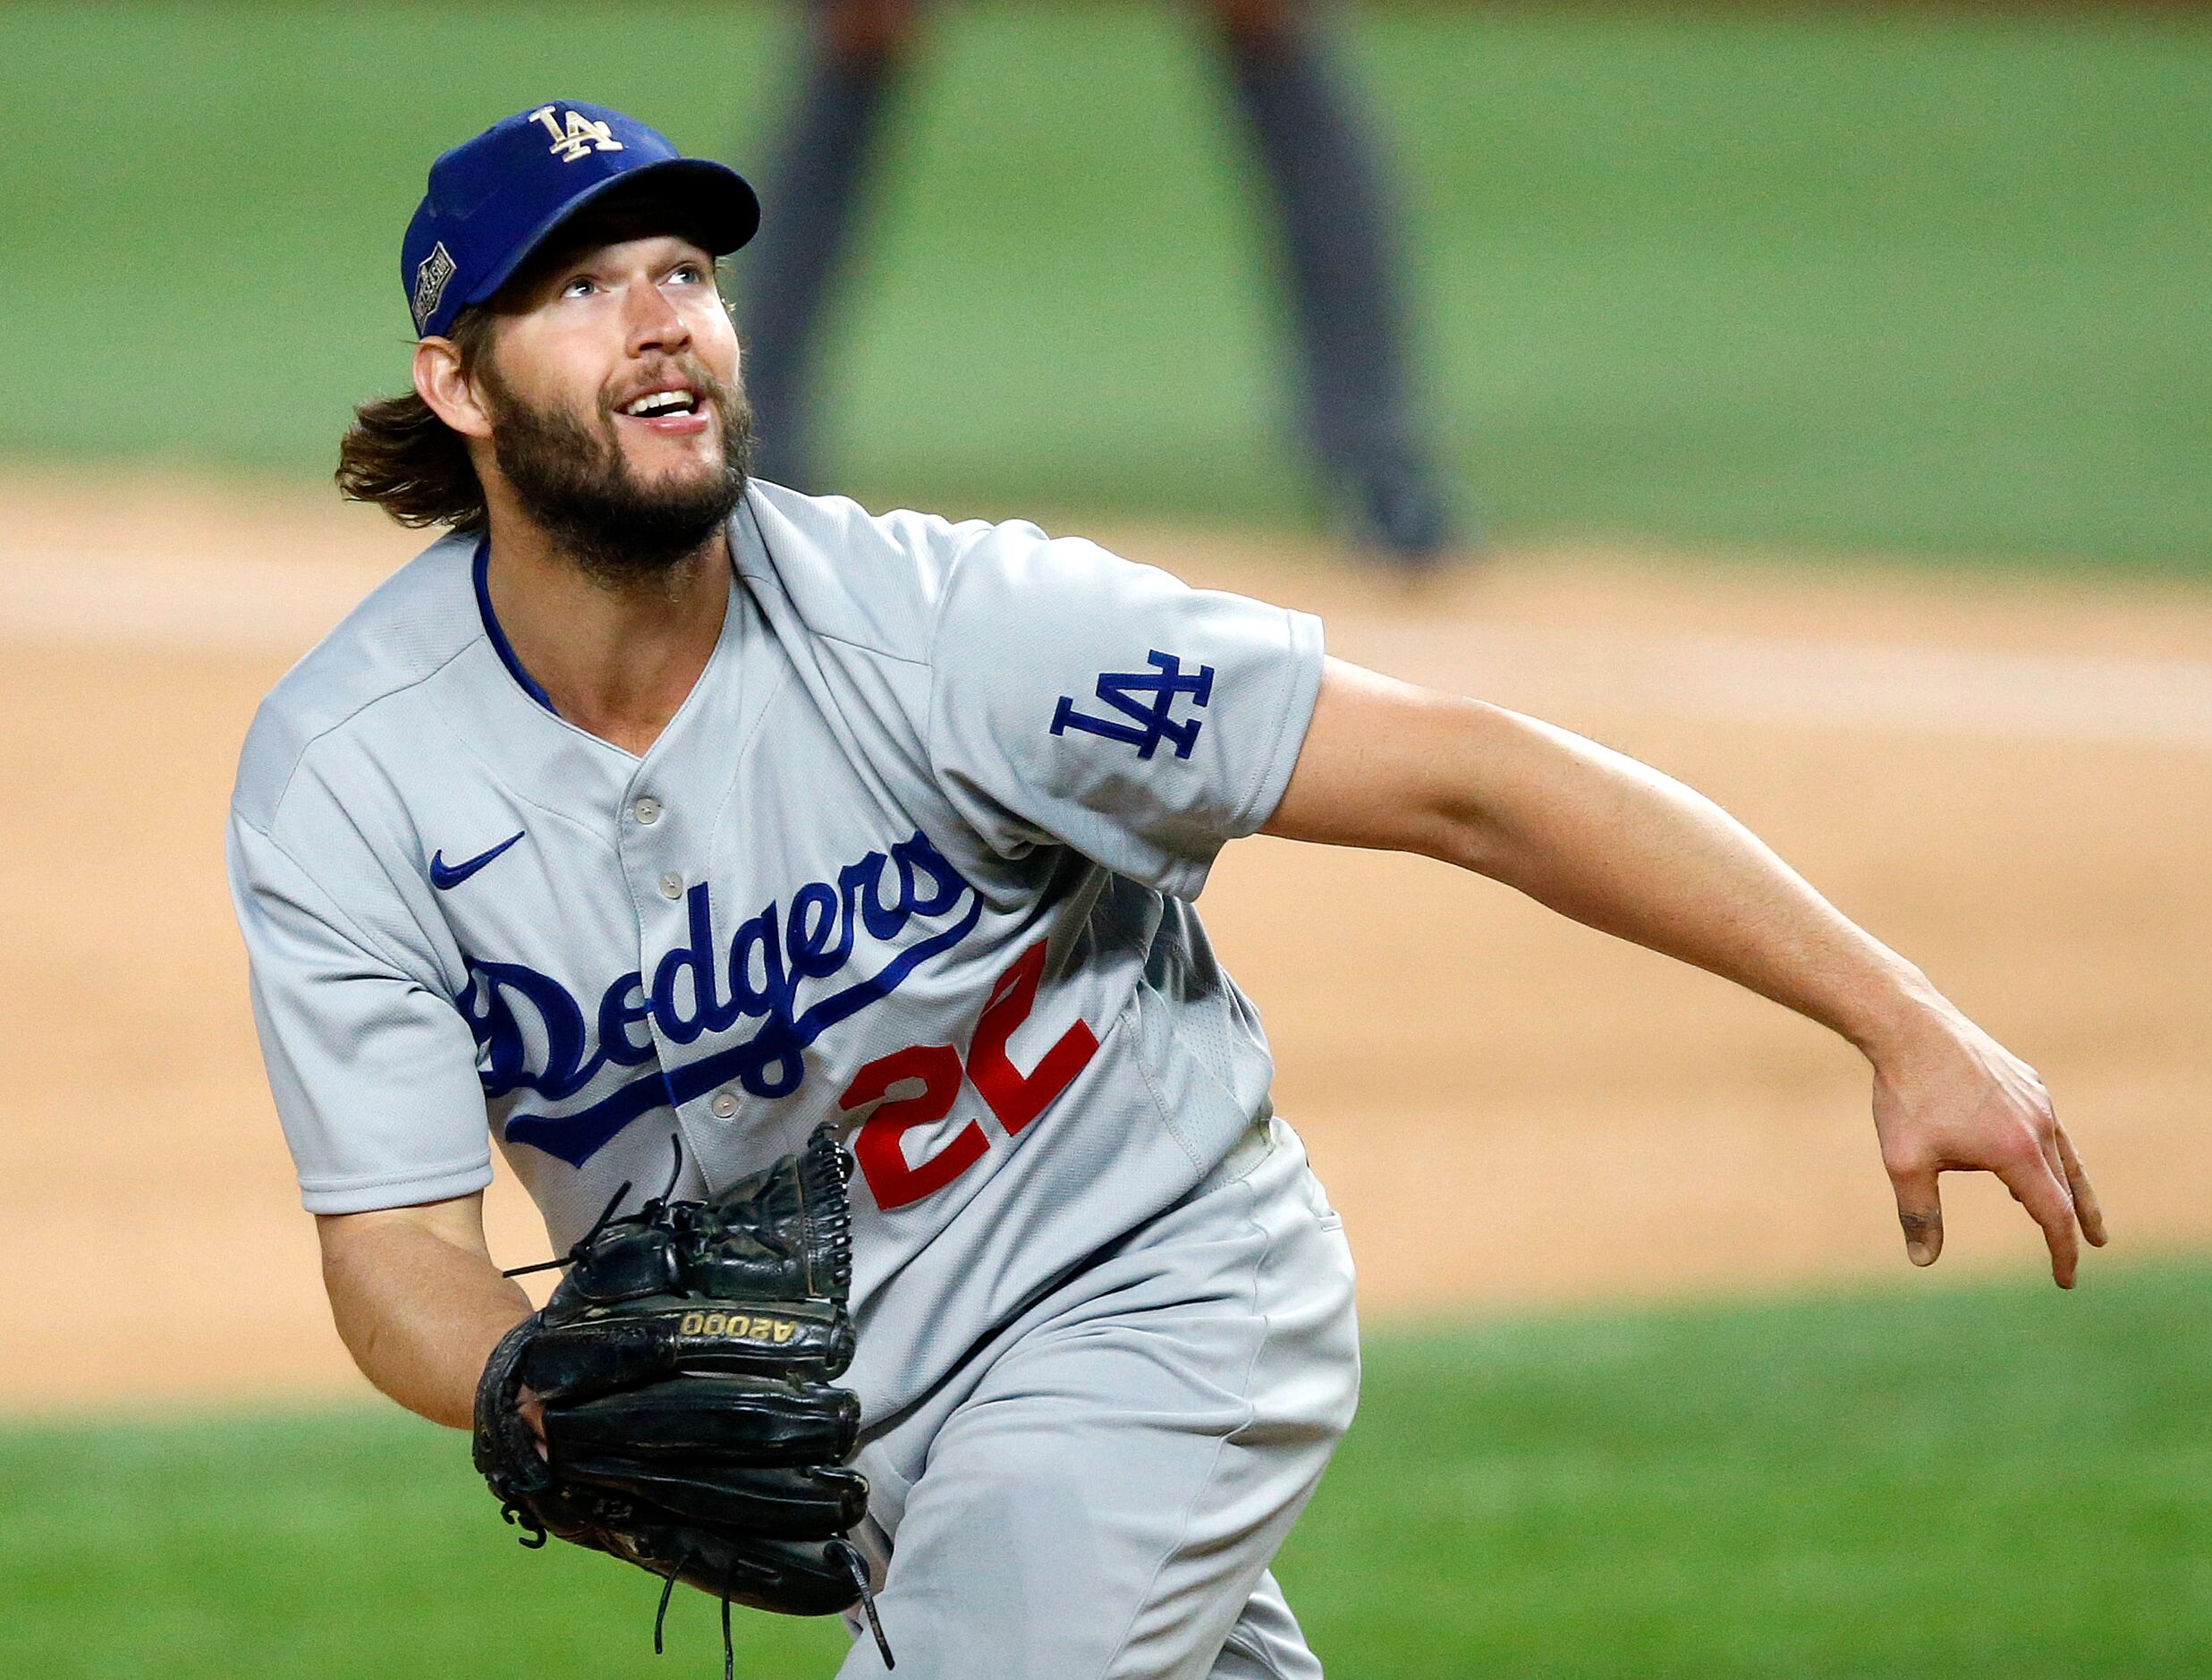 Dodgers can't hold back Marcell Ozuna and Braves in loss - Los